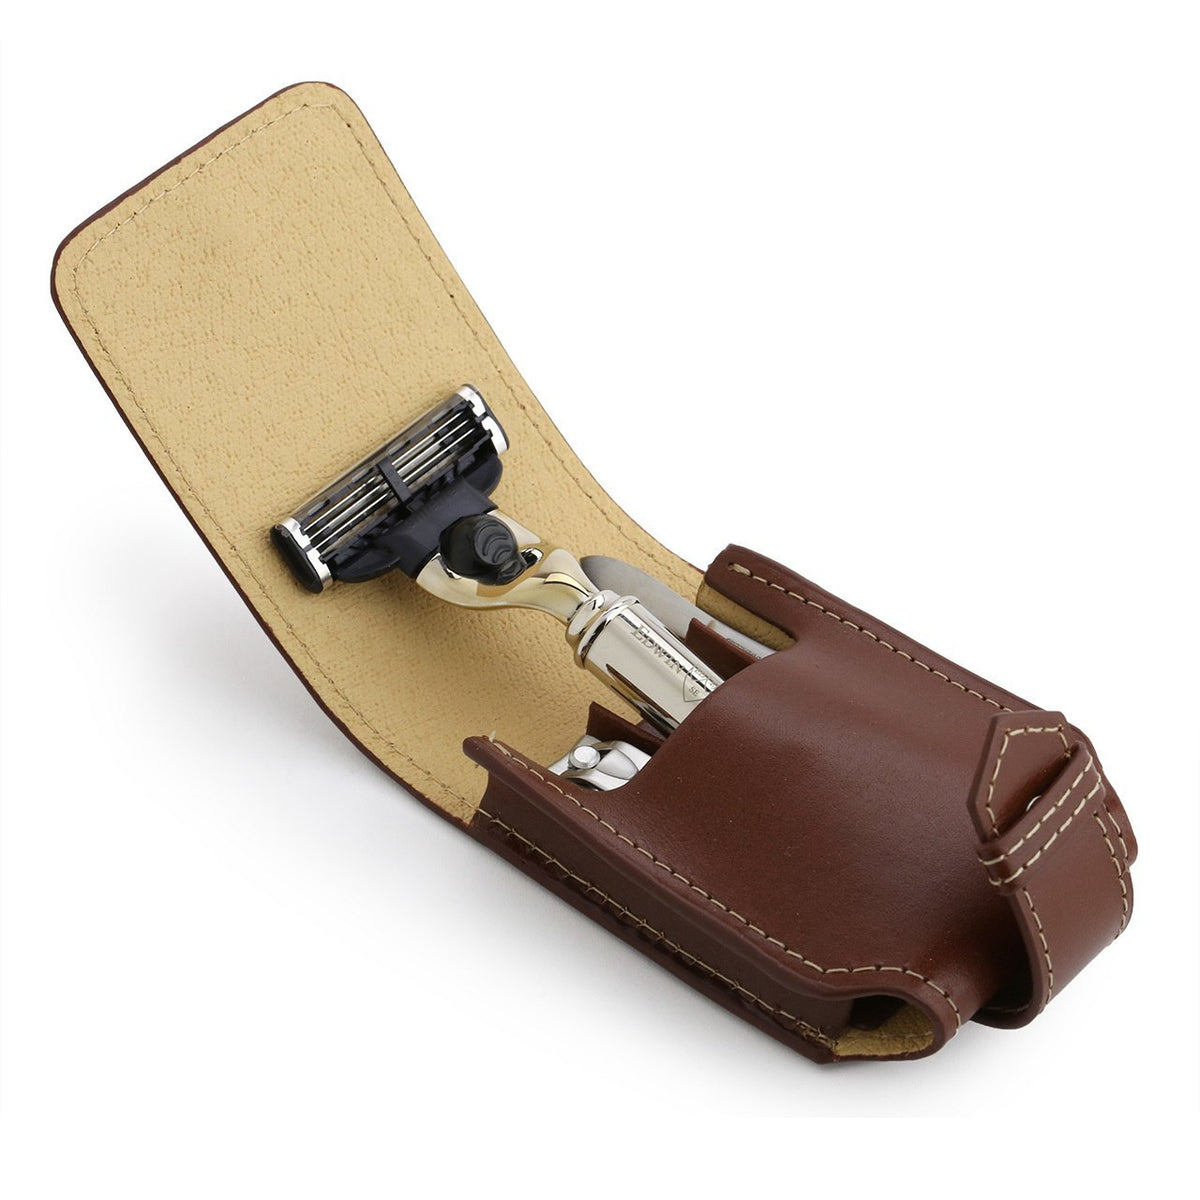 Edwin Jagger Travel set, Mach3 razor, fingernail clippers and tweezers in a brown leather case